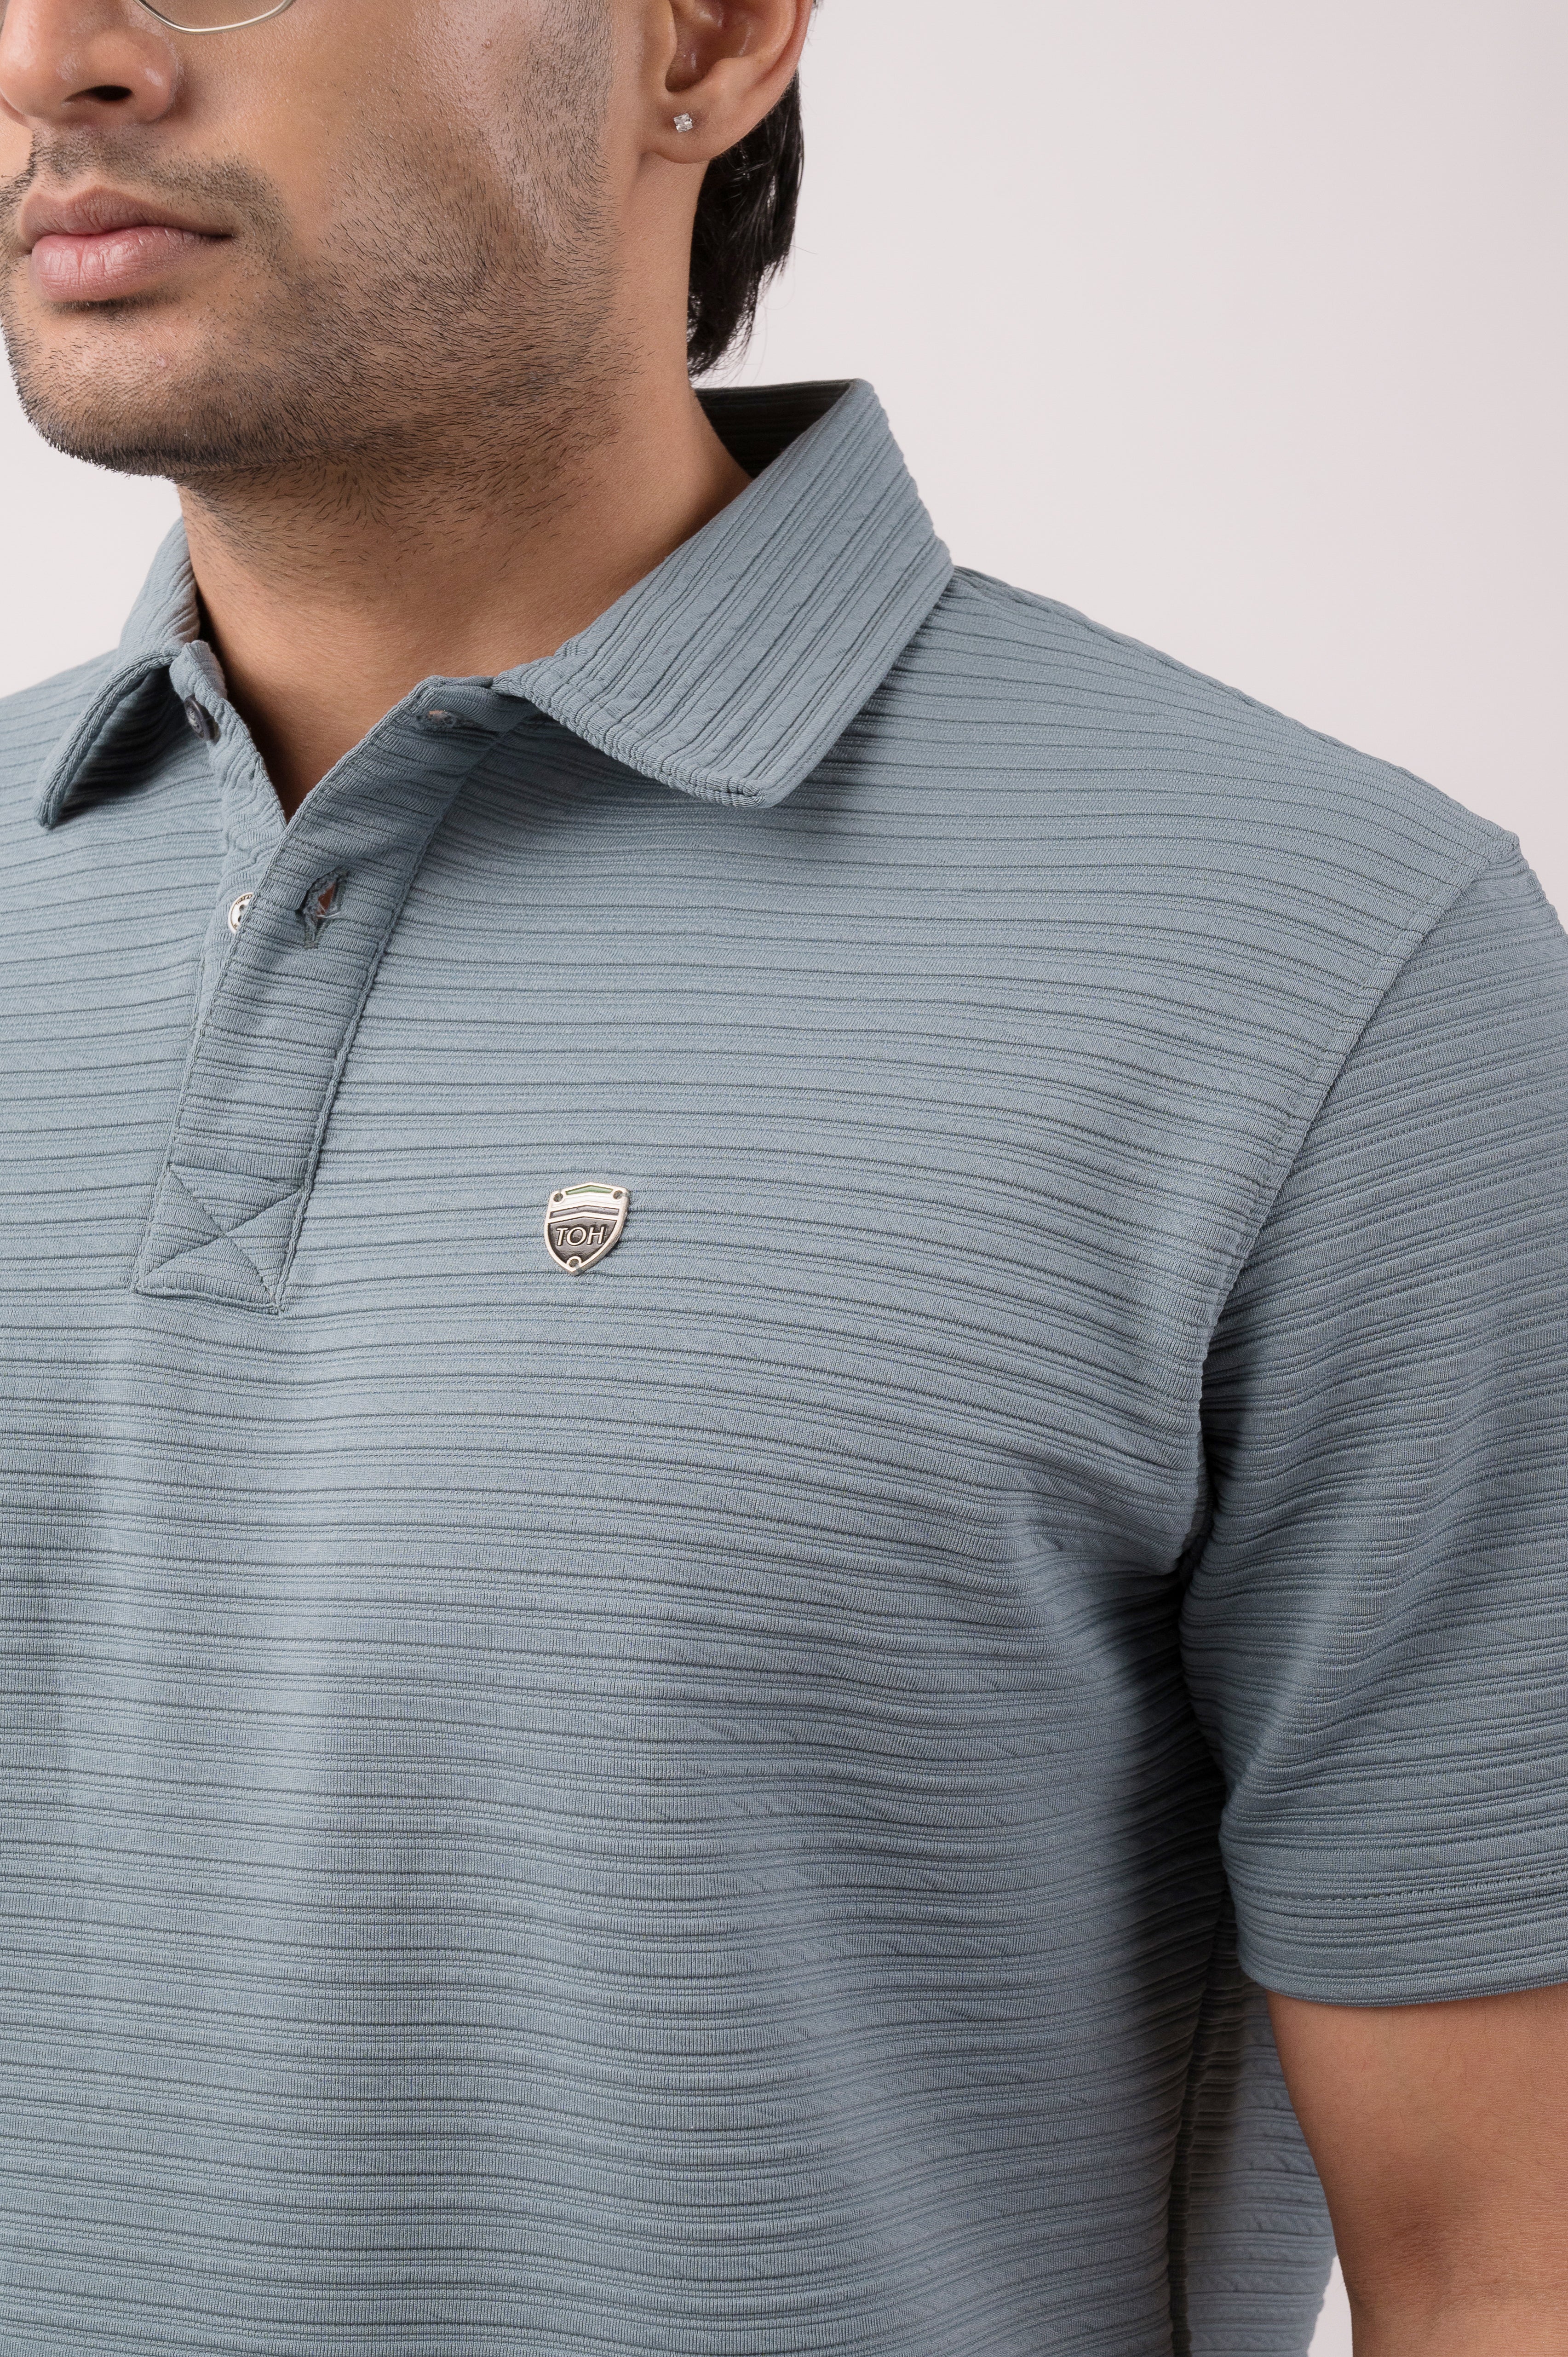 Pale Blue Solid Self stripes Polo